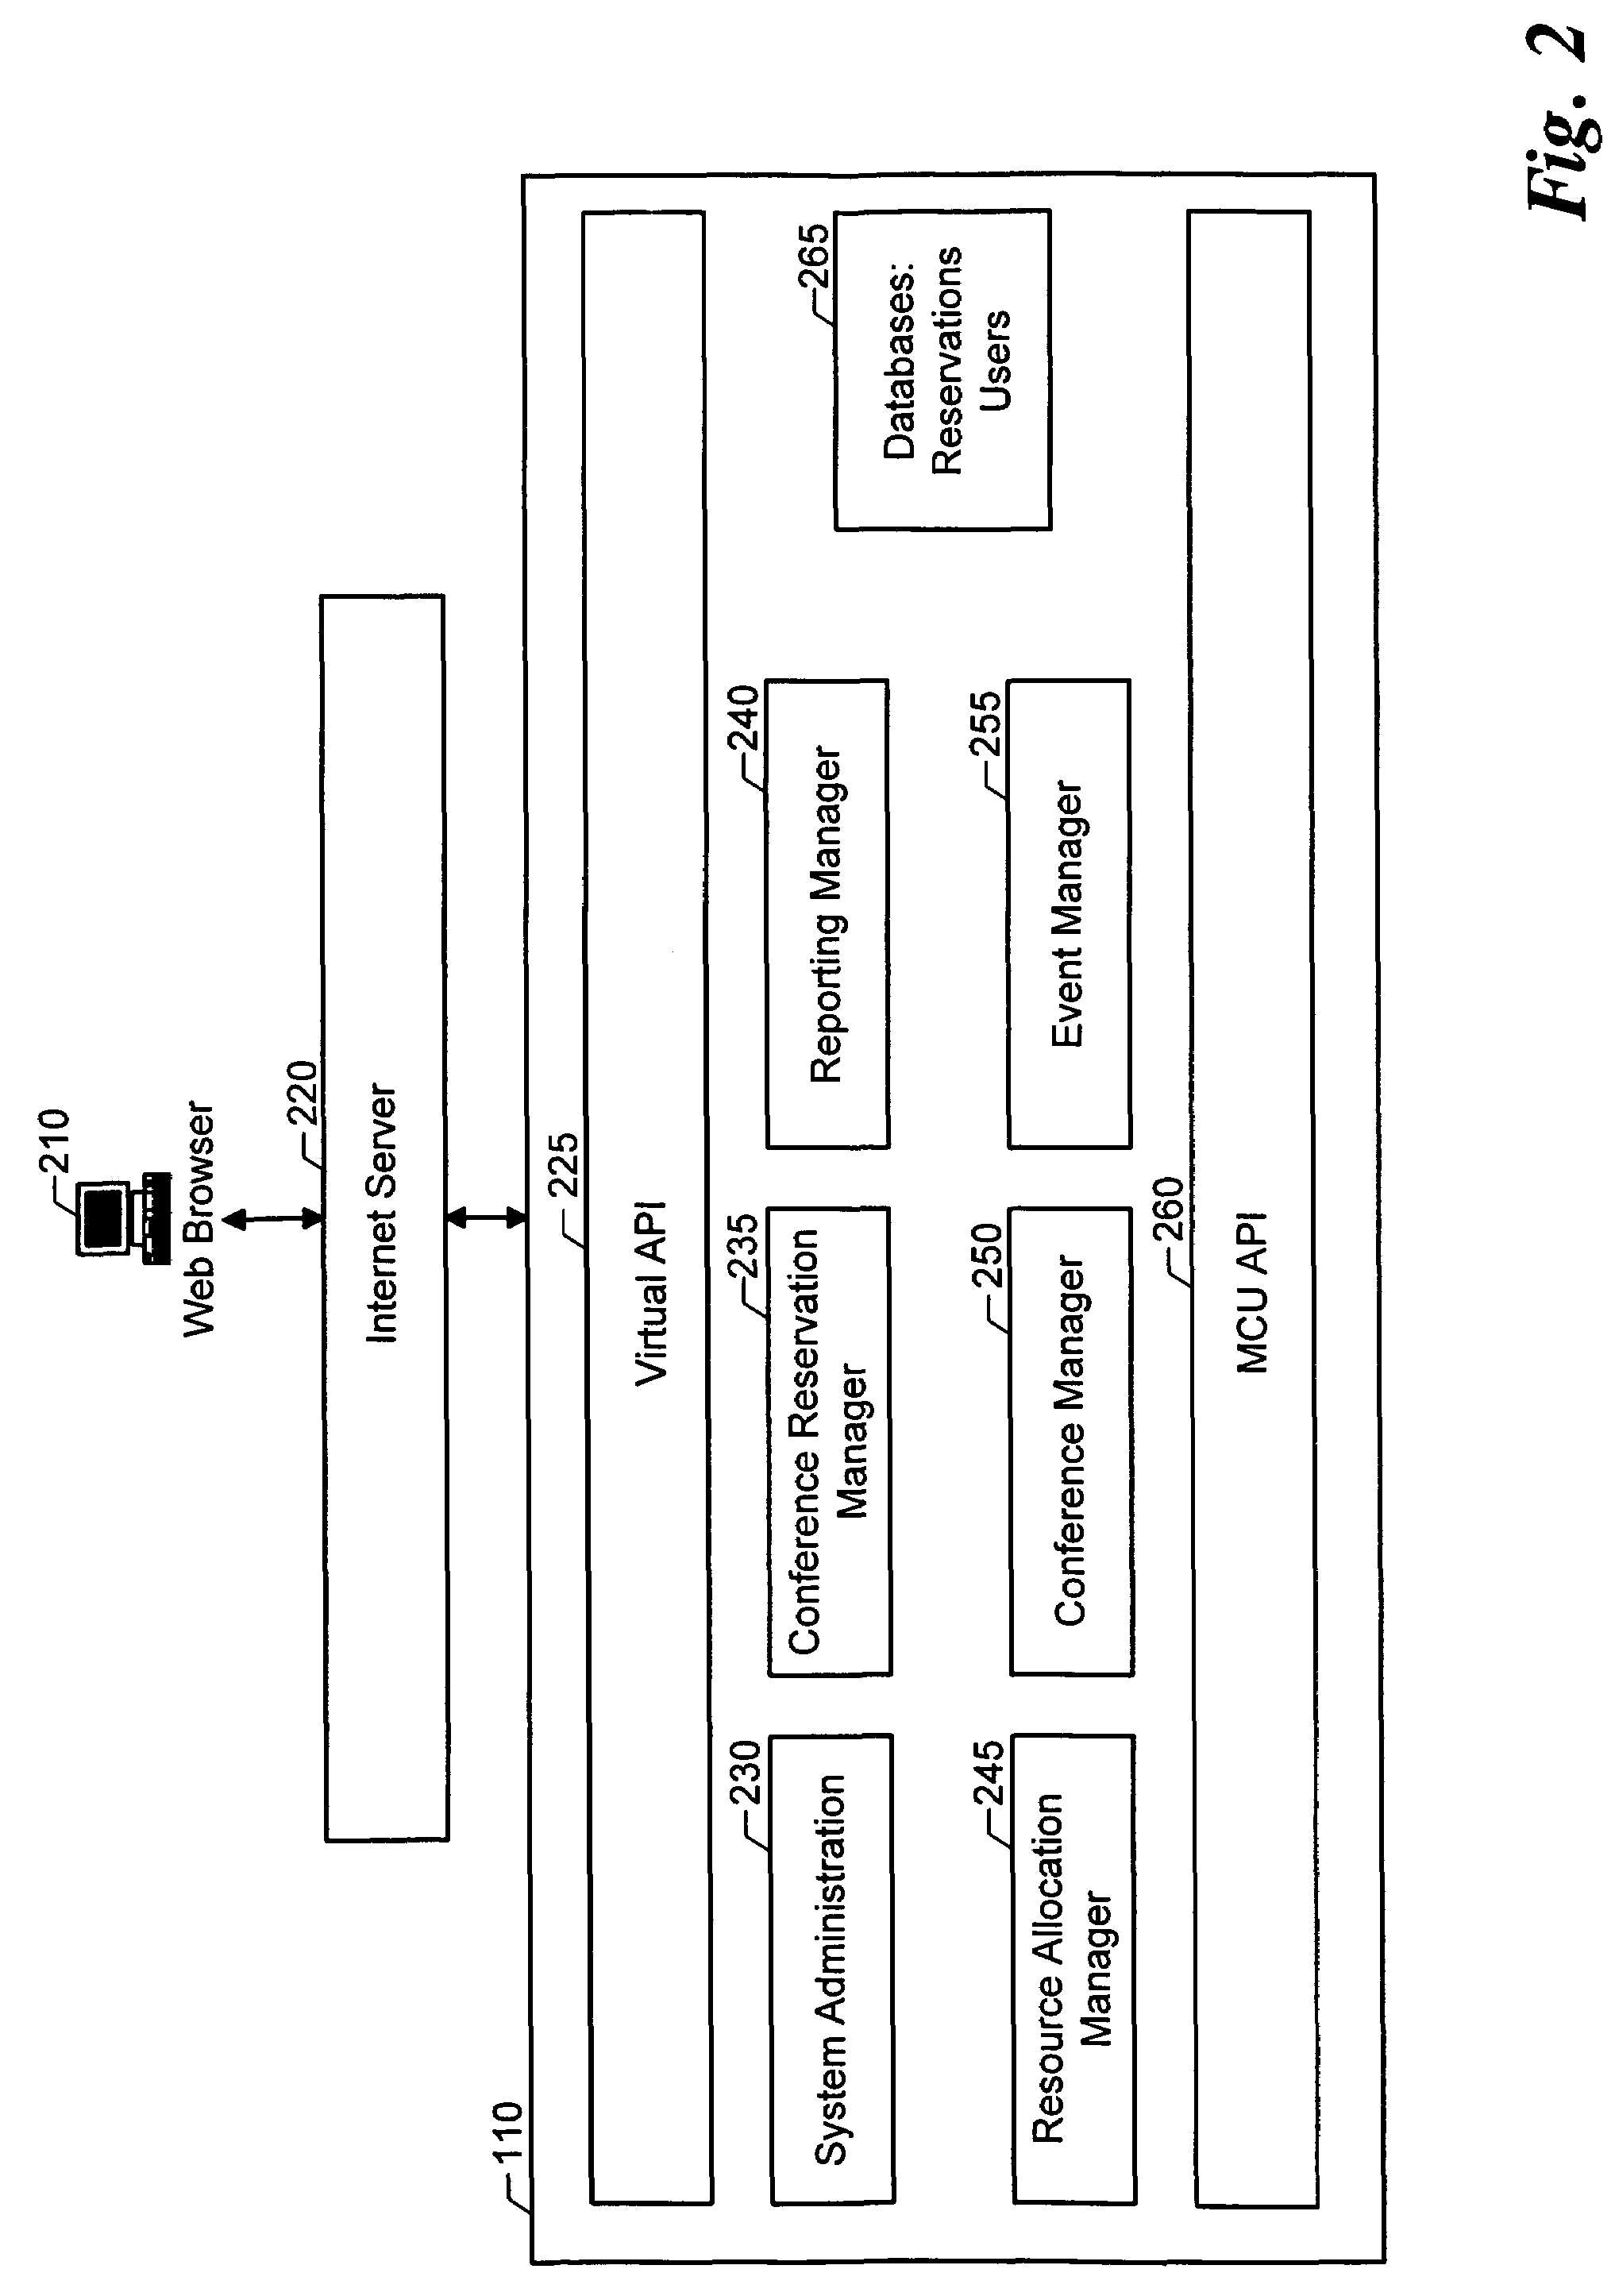 System and method for controlling one or more multipoint control units as one multipoint control unit